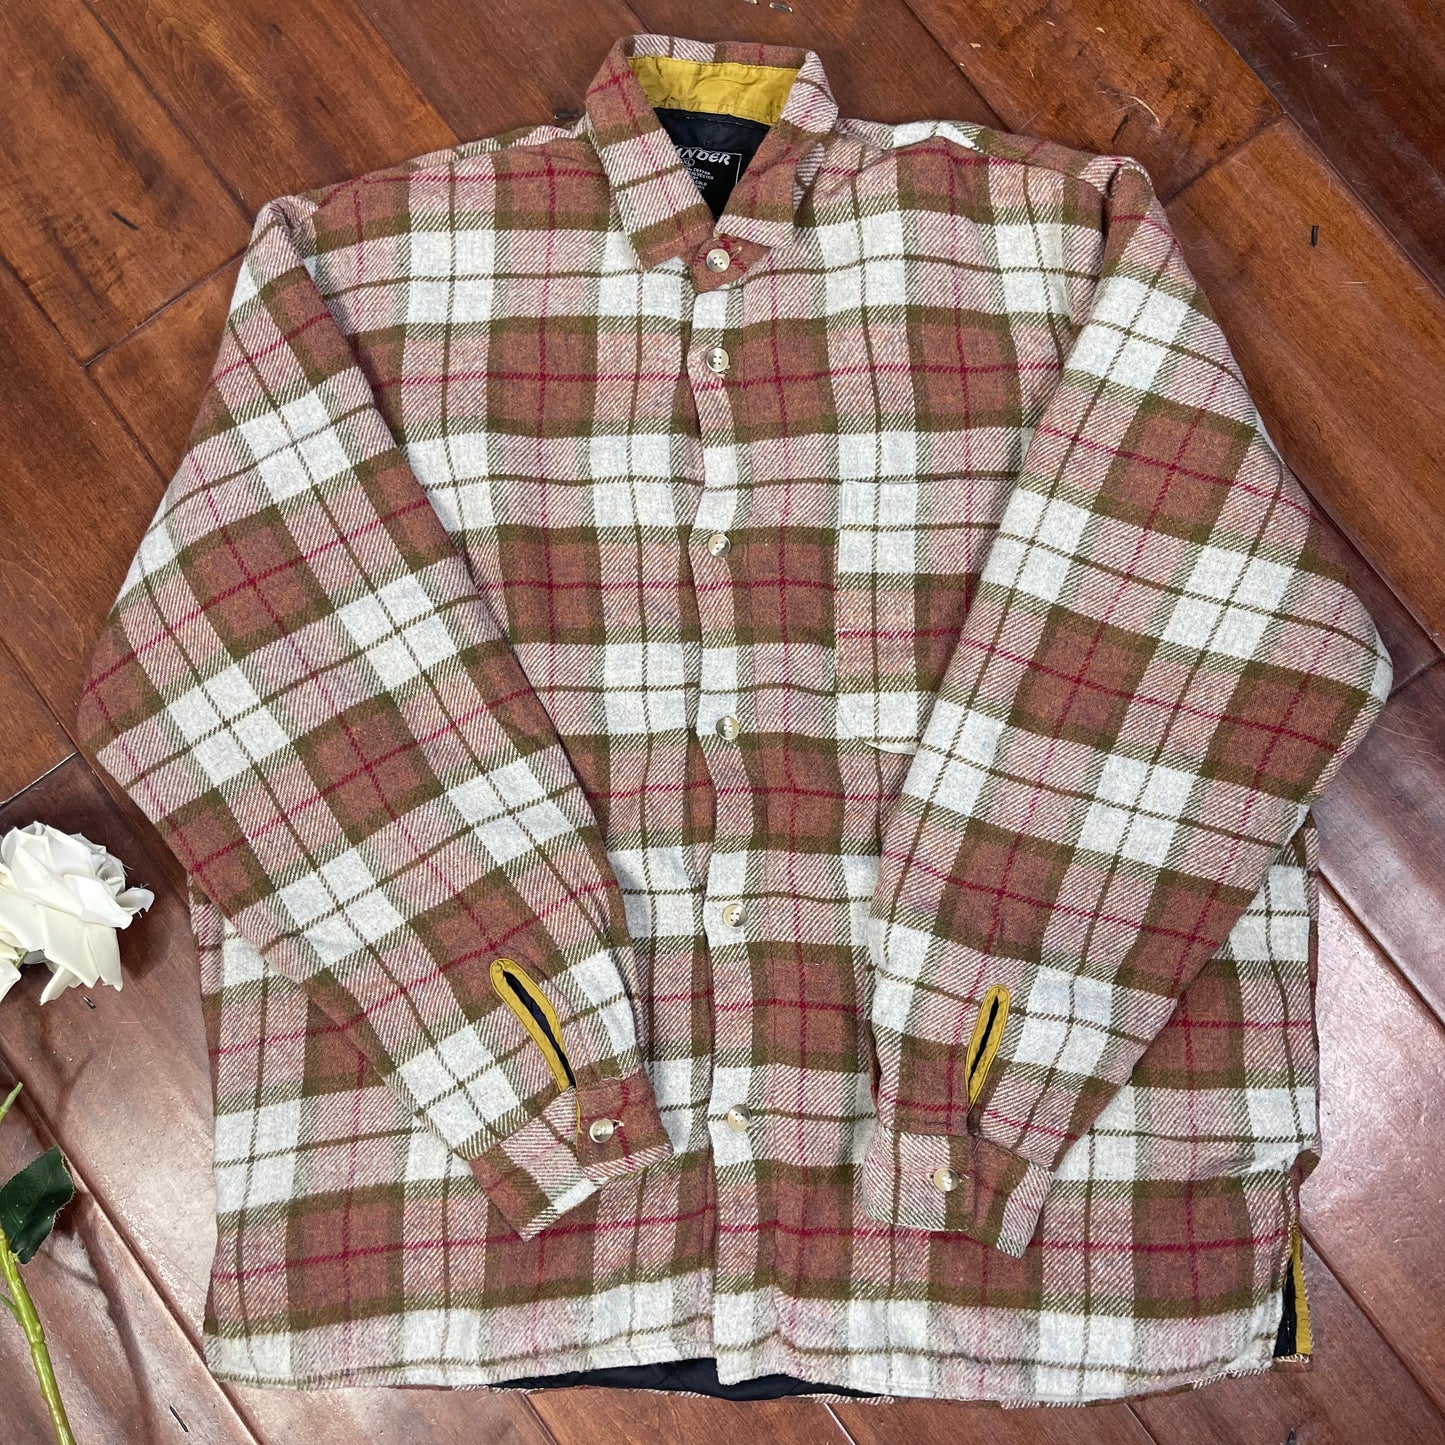 THRIFTED THERMAL PLAID BUTTON-UP